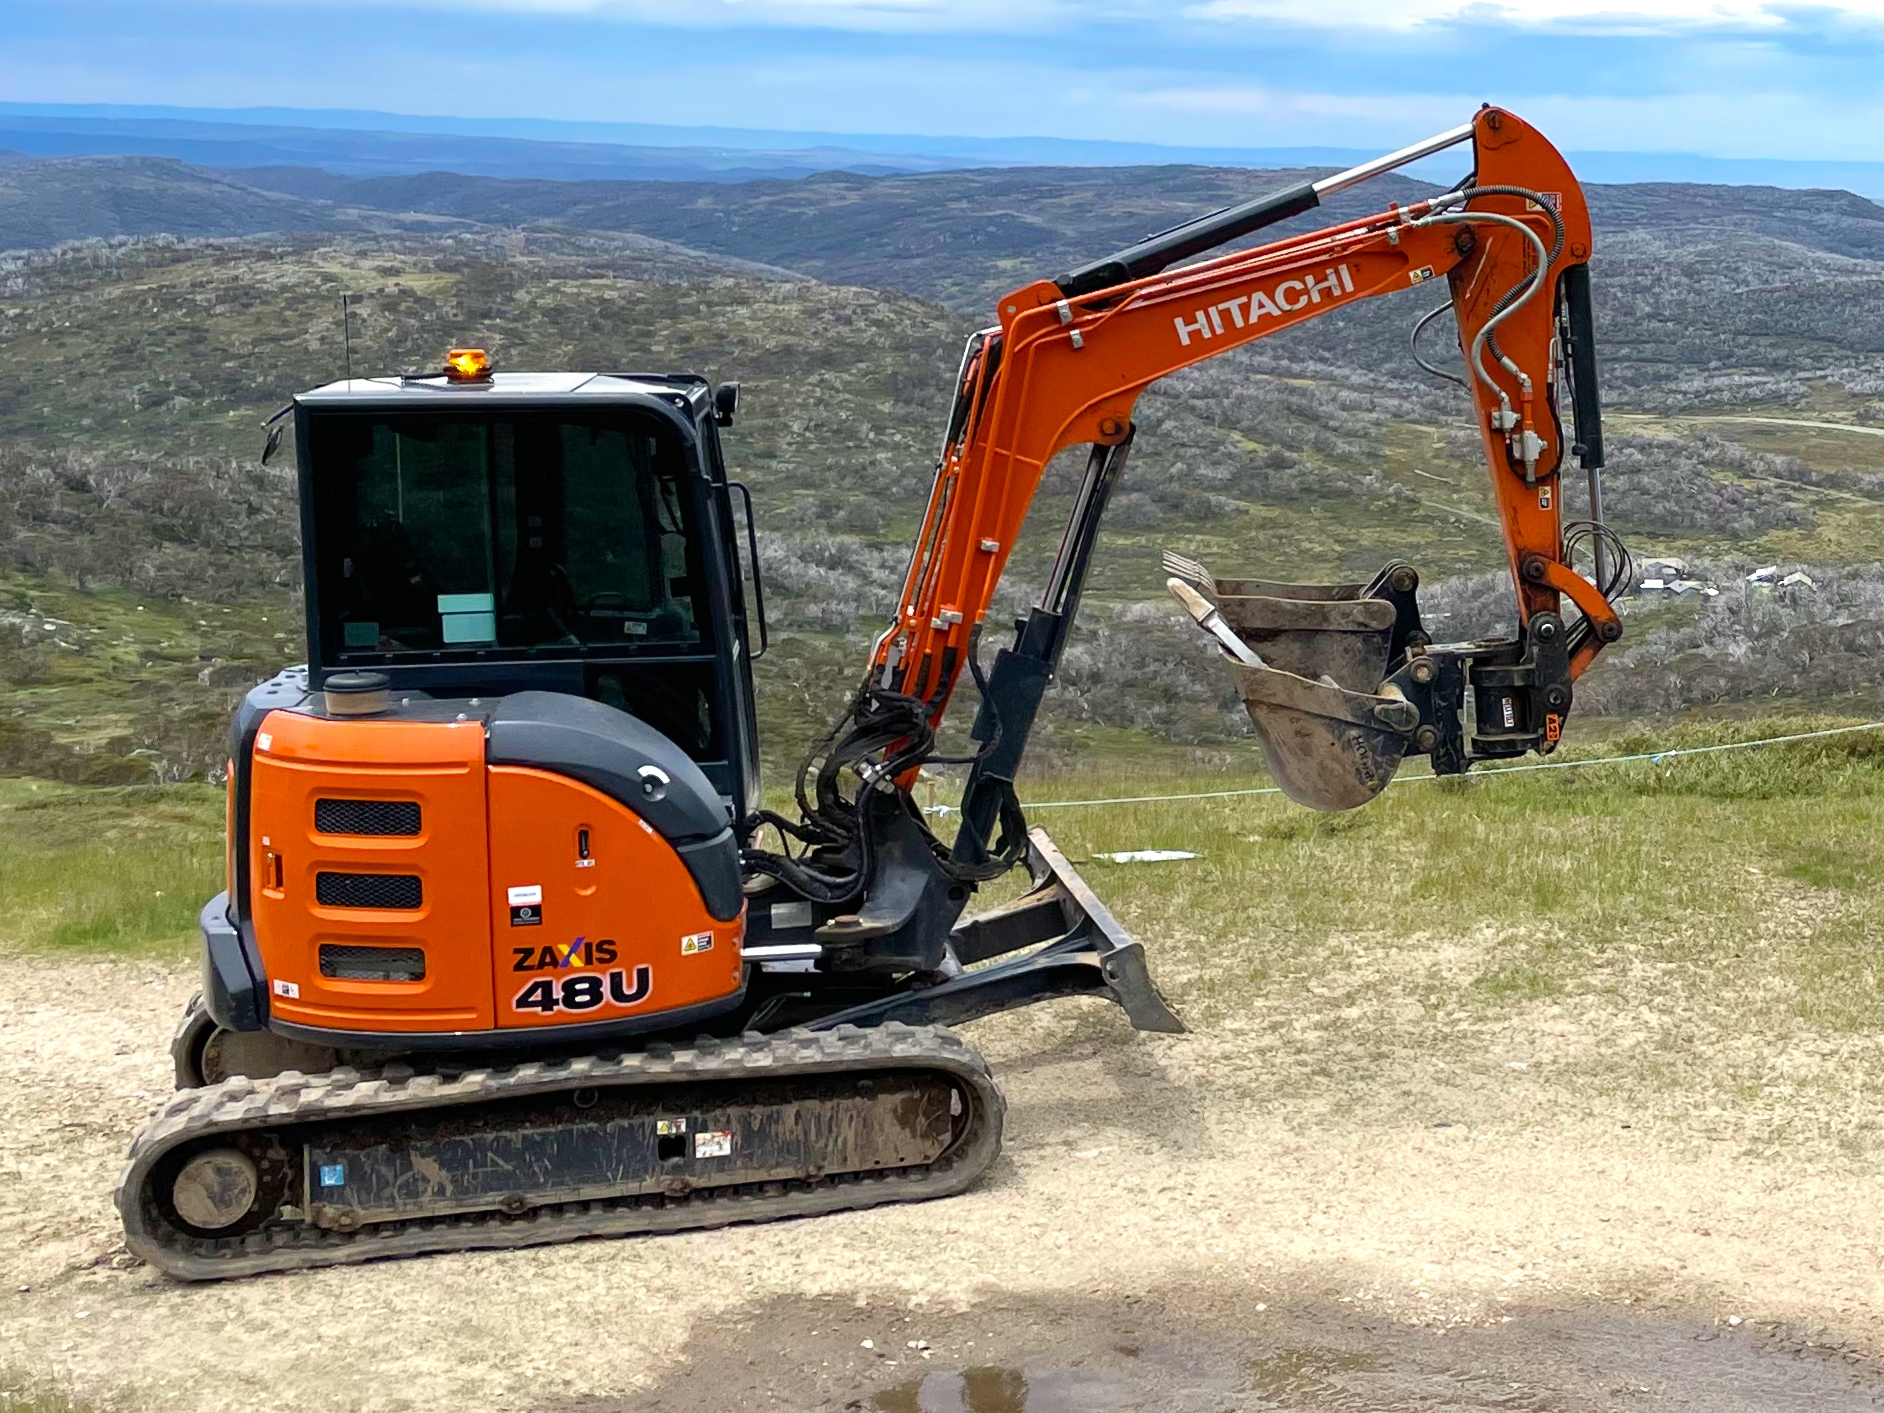 TH Excavation's Hitachi 4.8 tonne excavator basking in the sunlight of the High Country